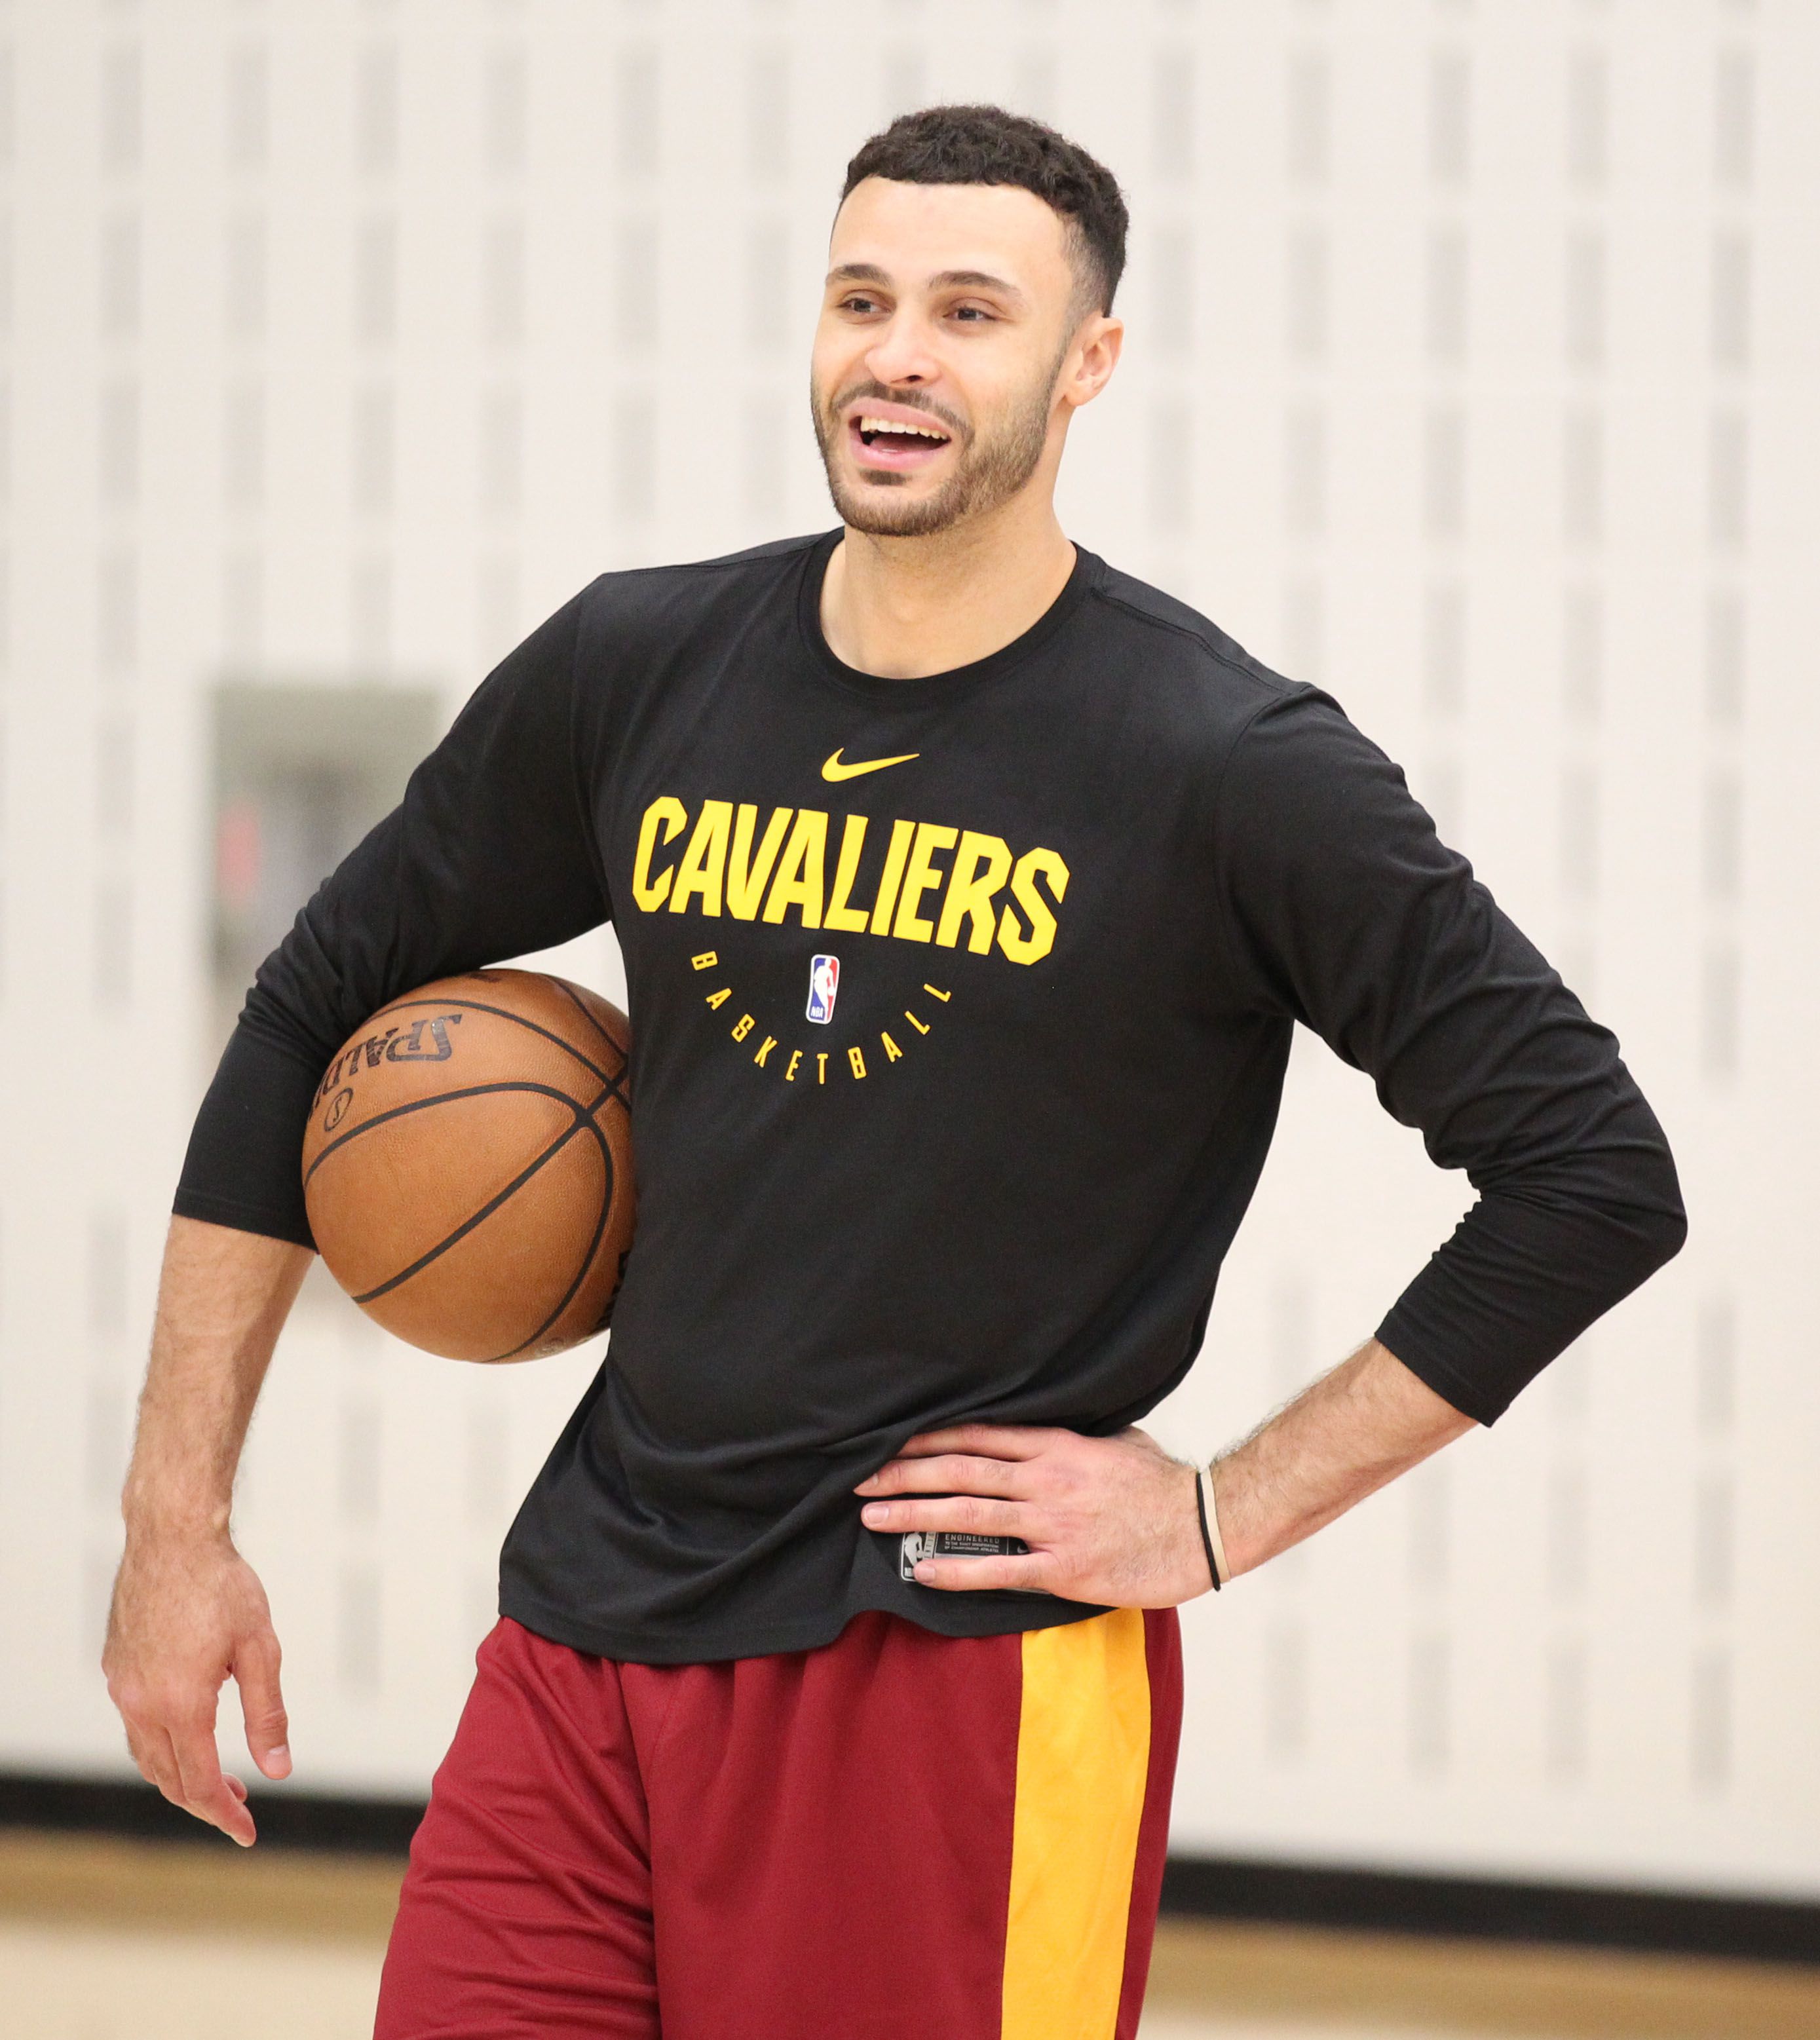 Larry Nance Jr. Worked With Cavs To Get To The Portland Trail